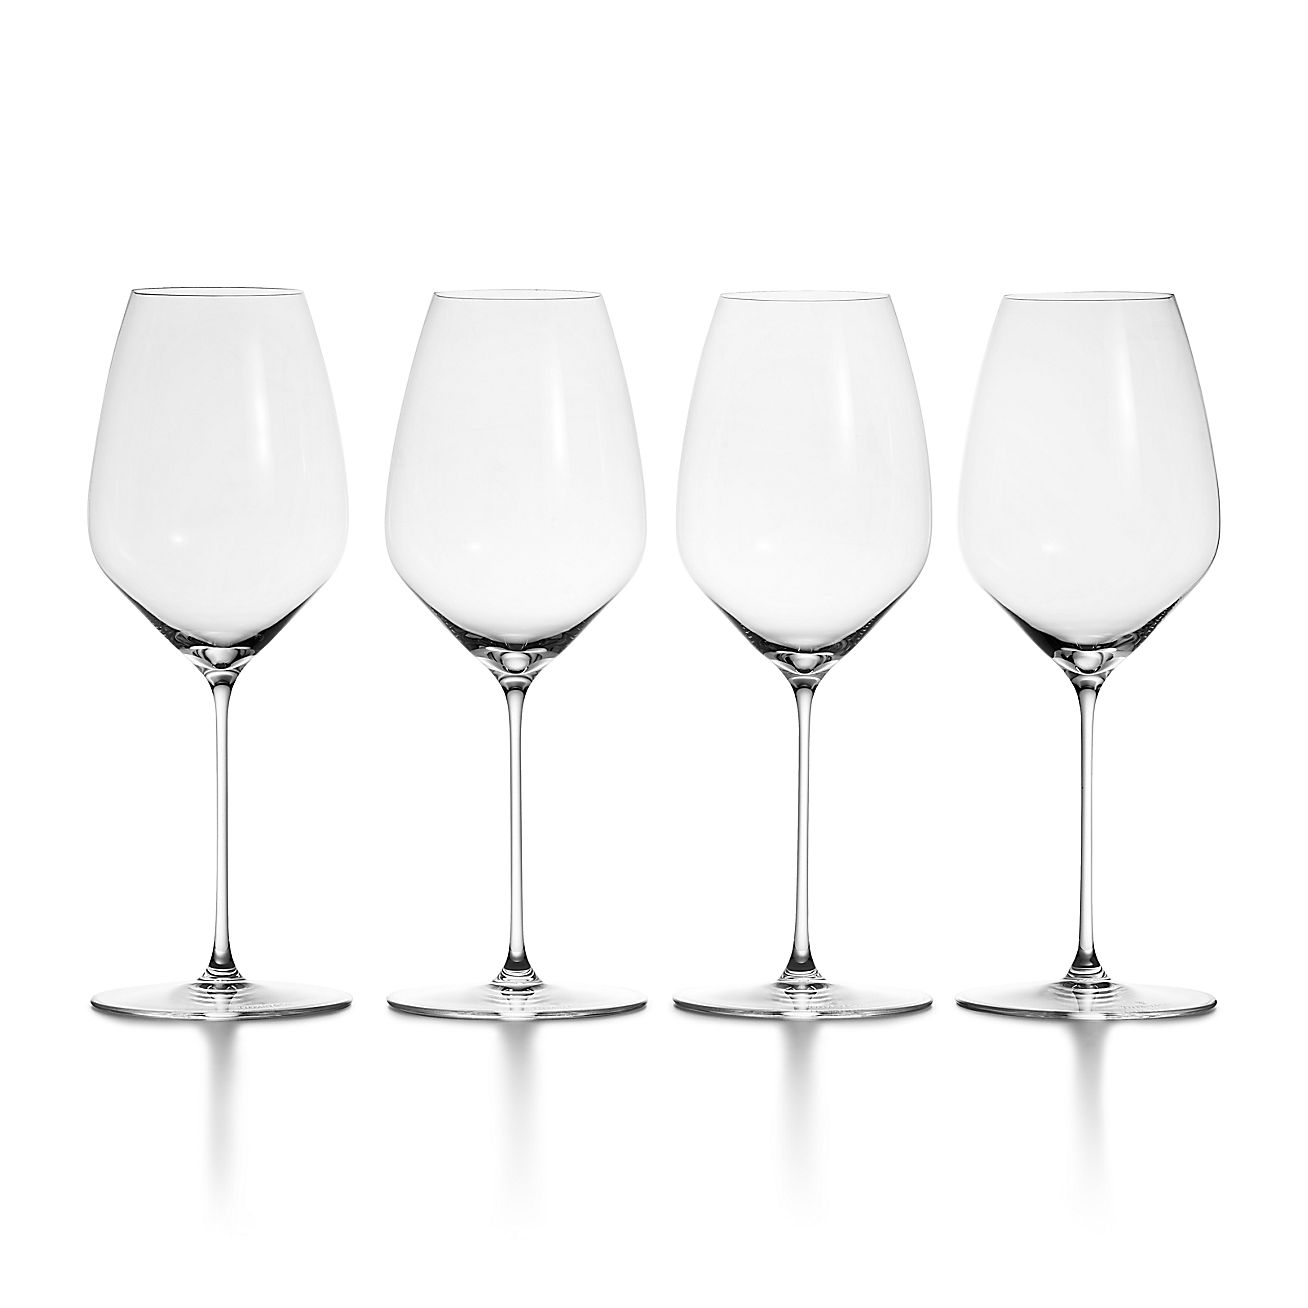 Tiffany Home Essentials Riesling Wine Glass in Crystal Glass, Set